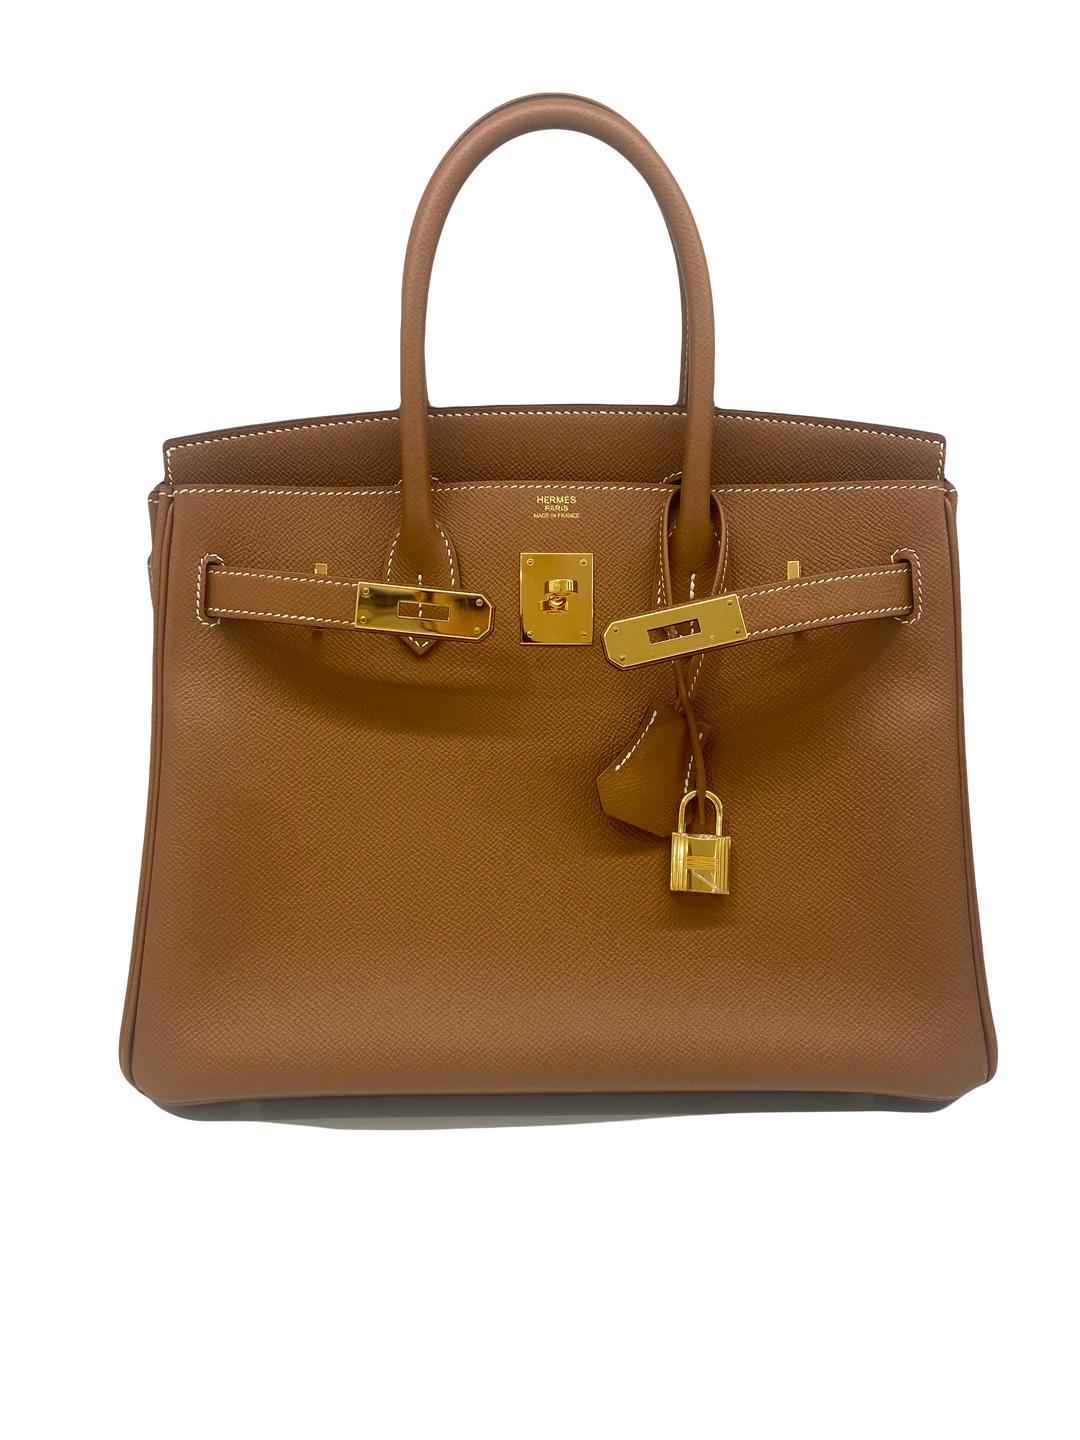 Hermes Birkin 30 Gold GHW 2018 In Good Condition For Sale In Double Bay, AU